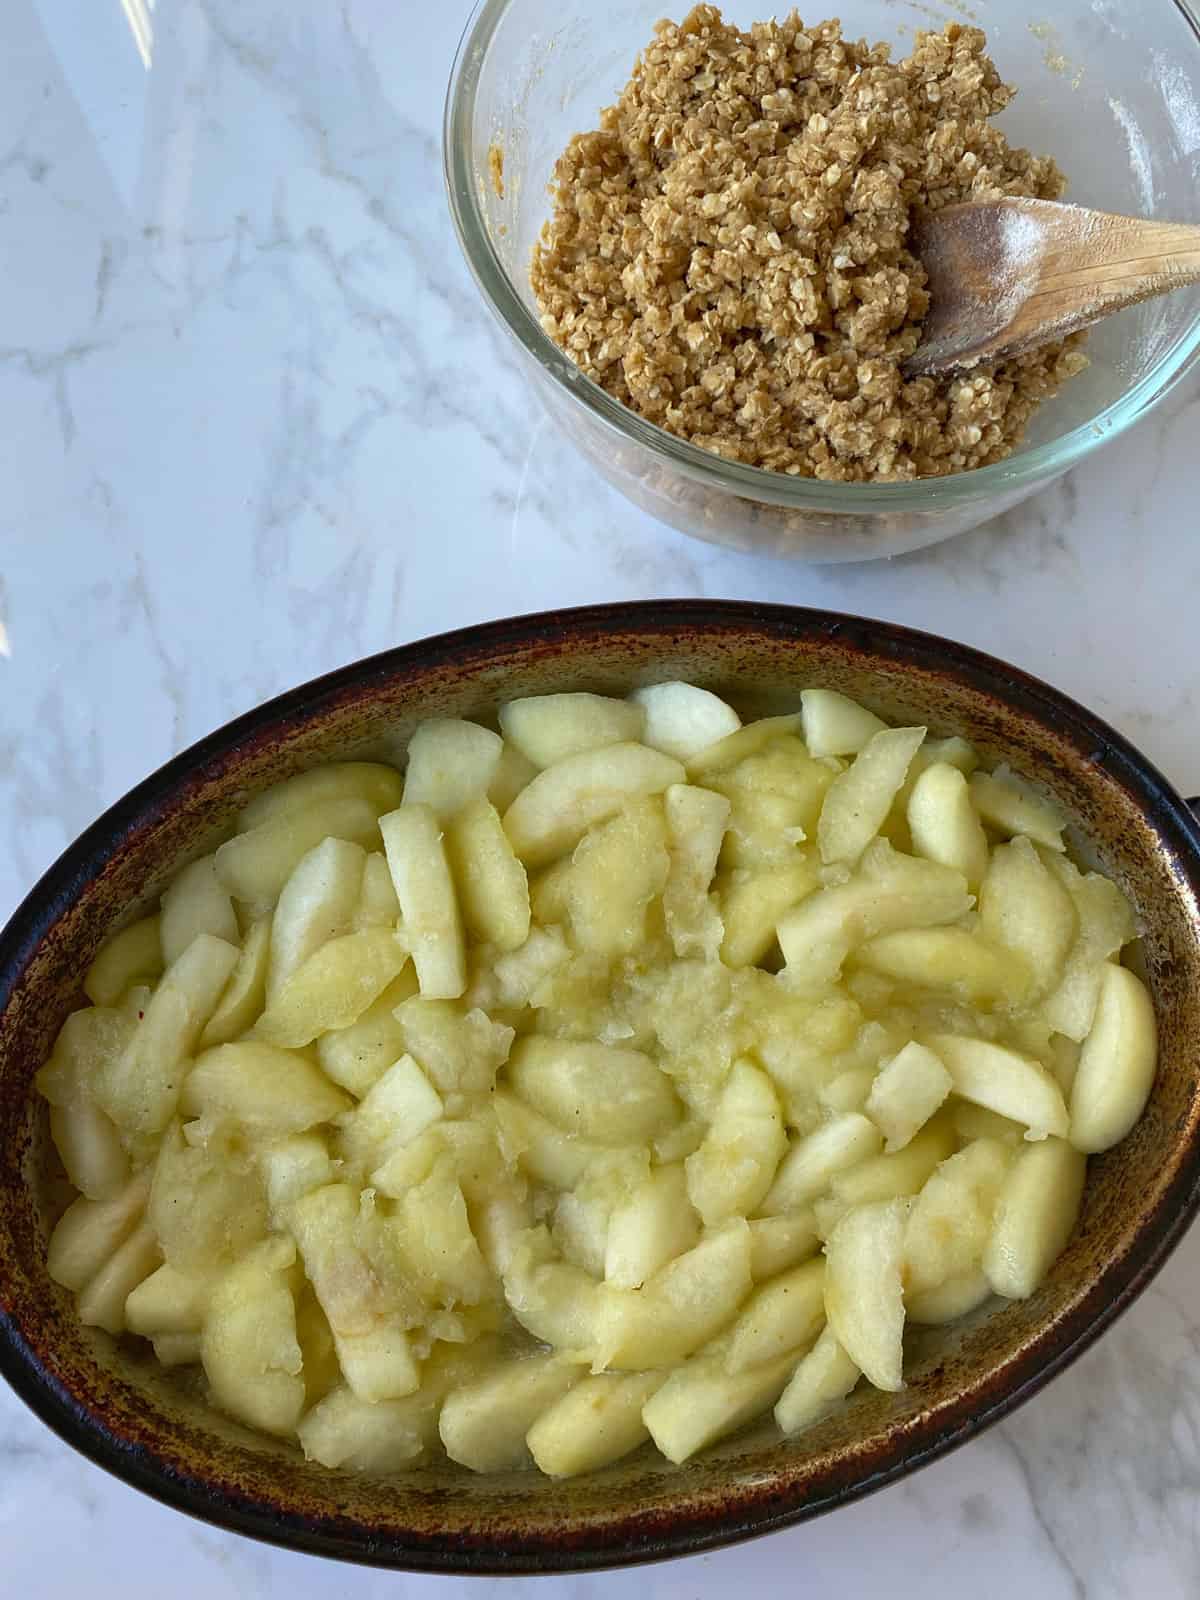 Cooked apple pieces in an oval dish and crumble topping in a glass bowl on a white bench.